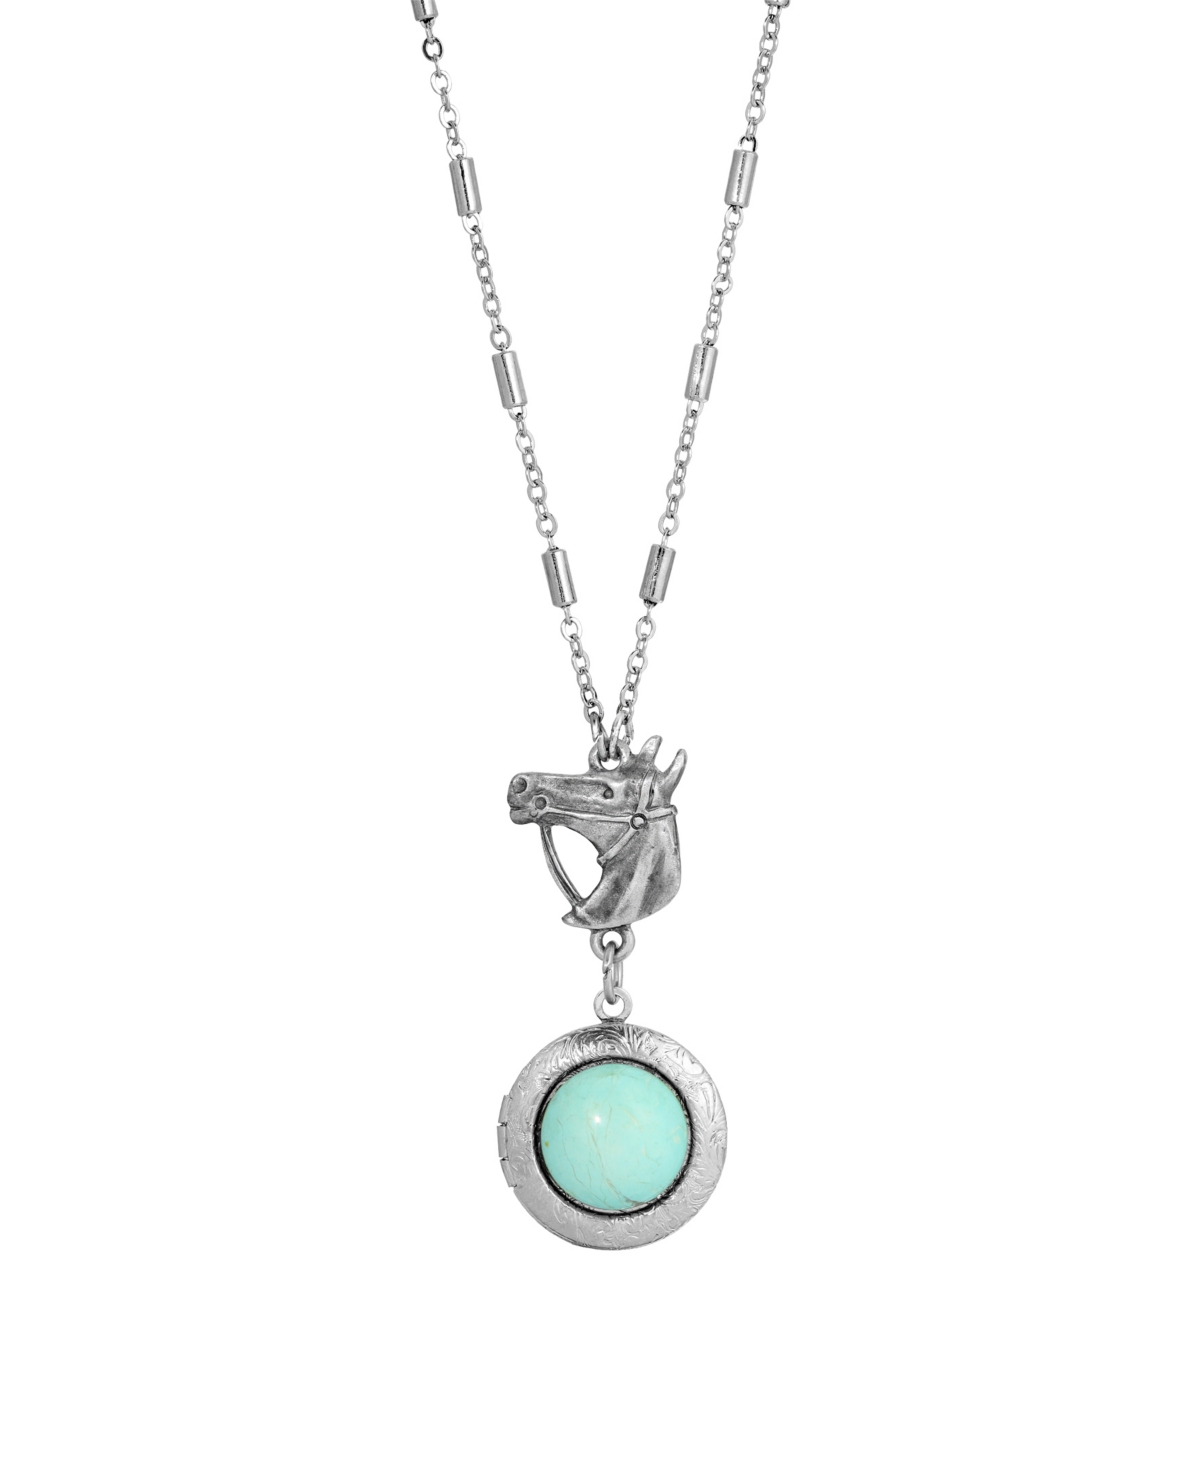 2028 Horse Head Locket Necklace In Turquoise